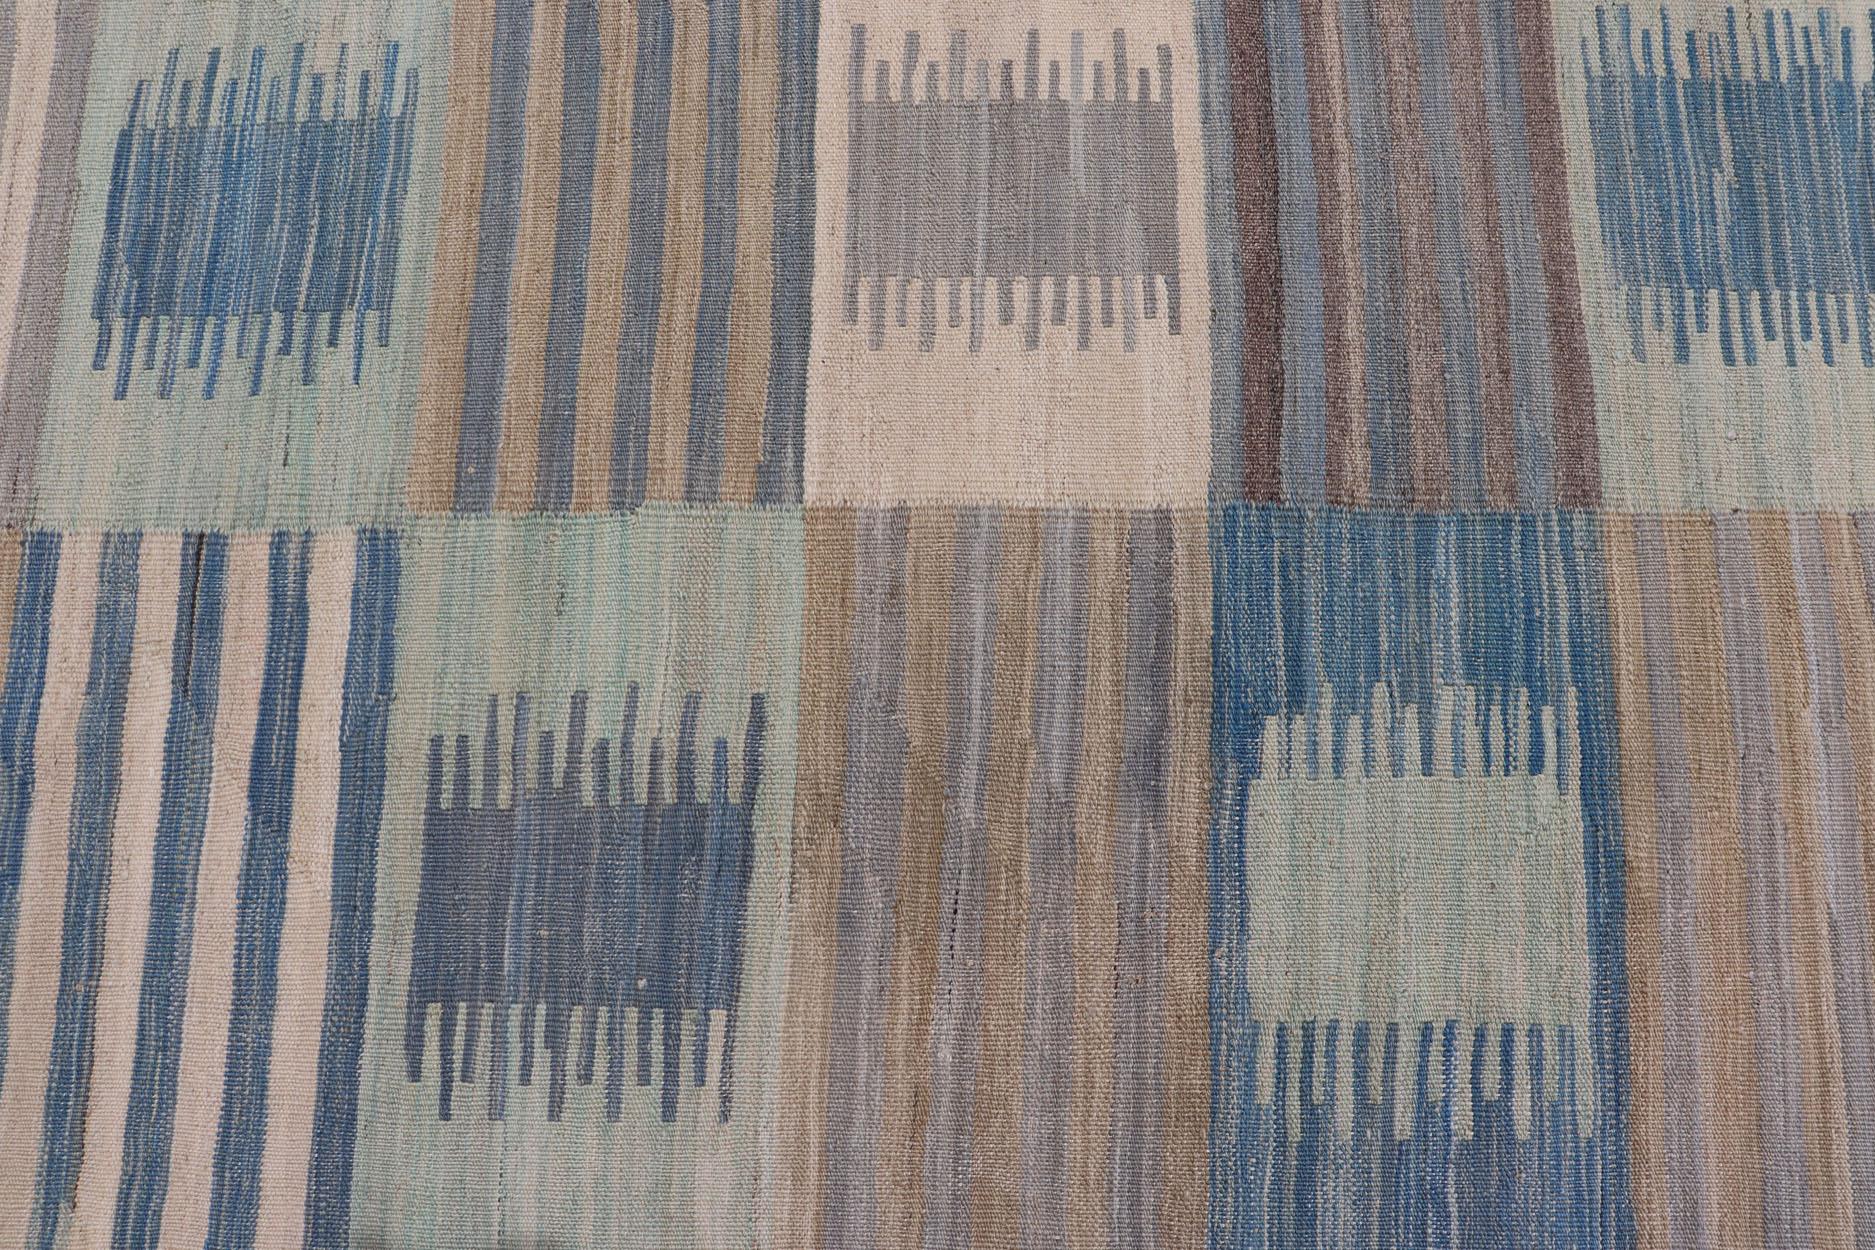 Flat-Weave Afghan Kilim Rug with Modern Design in Blues, Taupe, and Cream For Sale 3